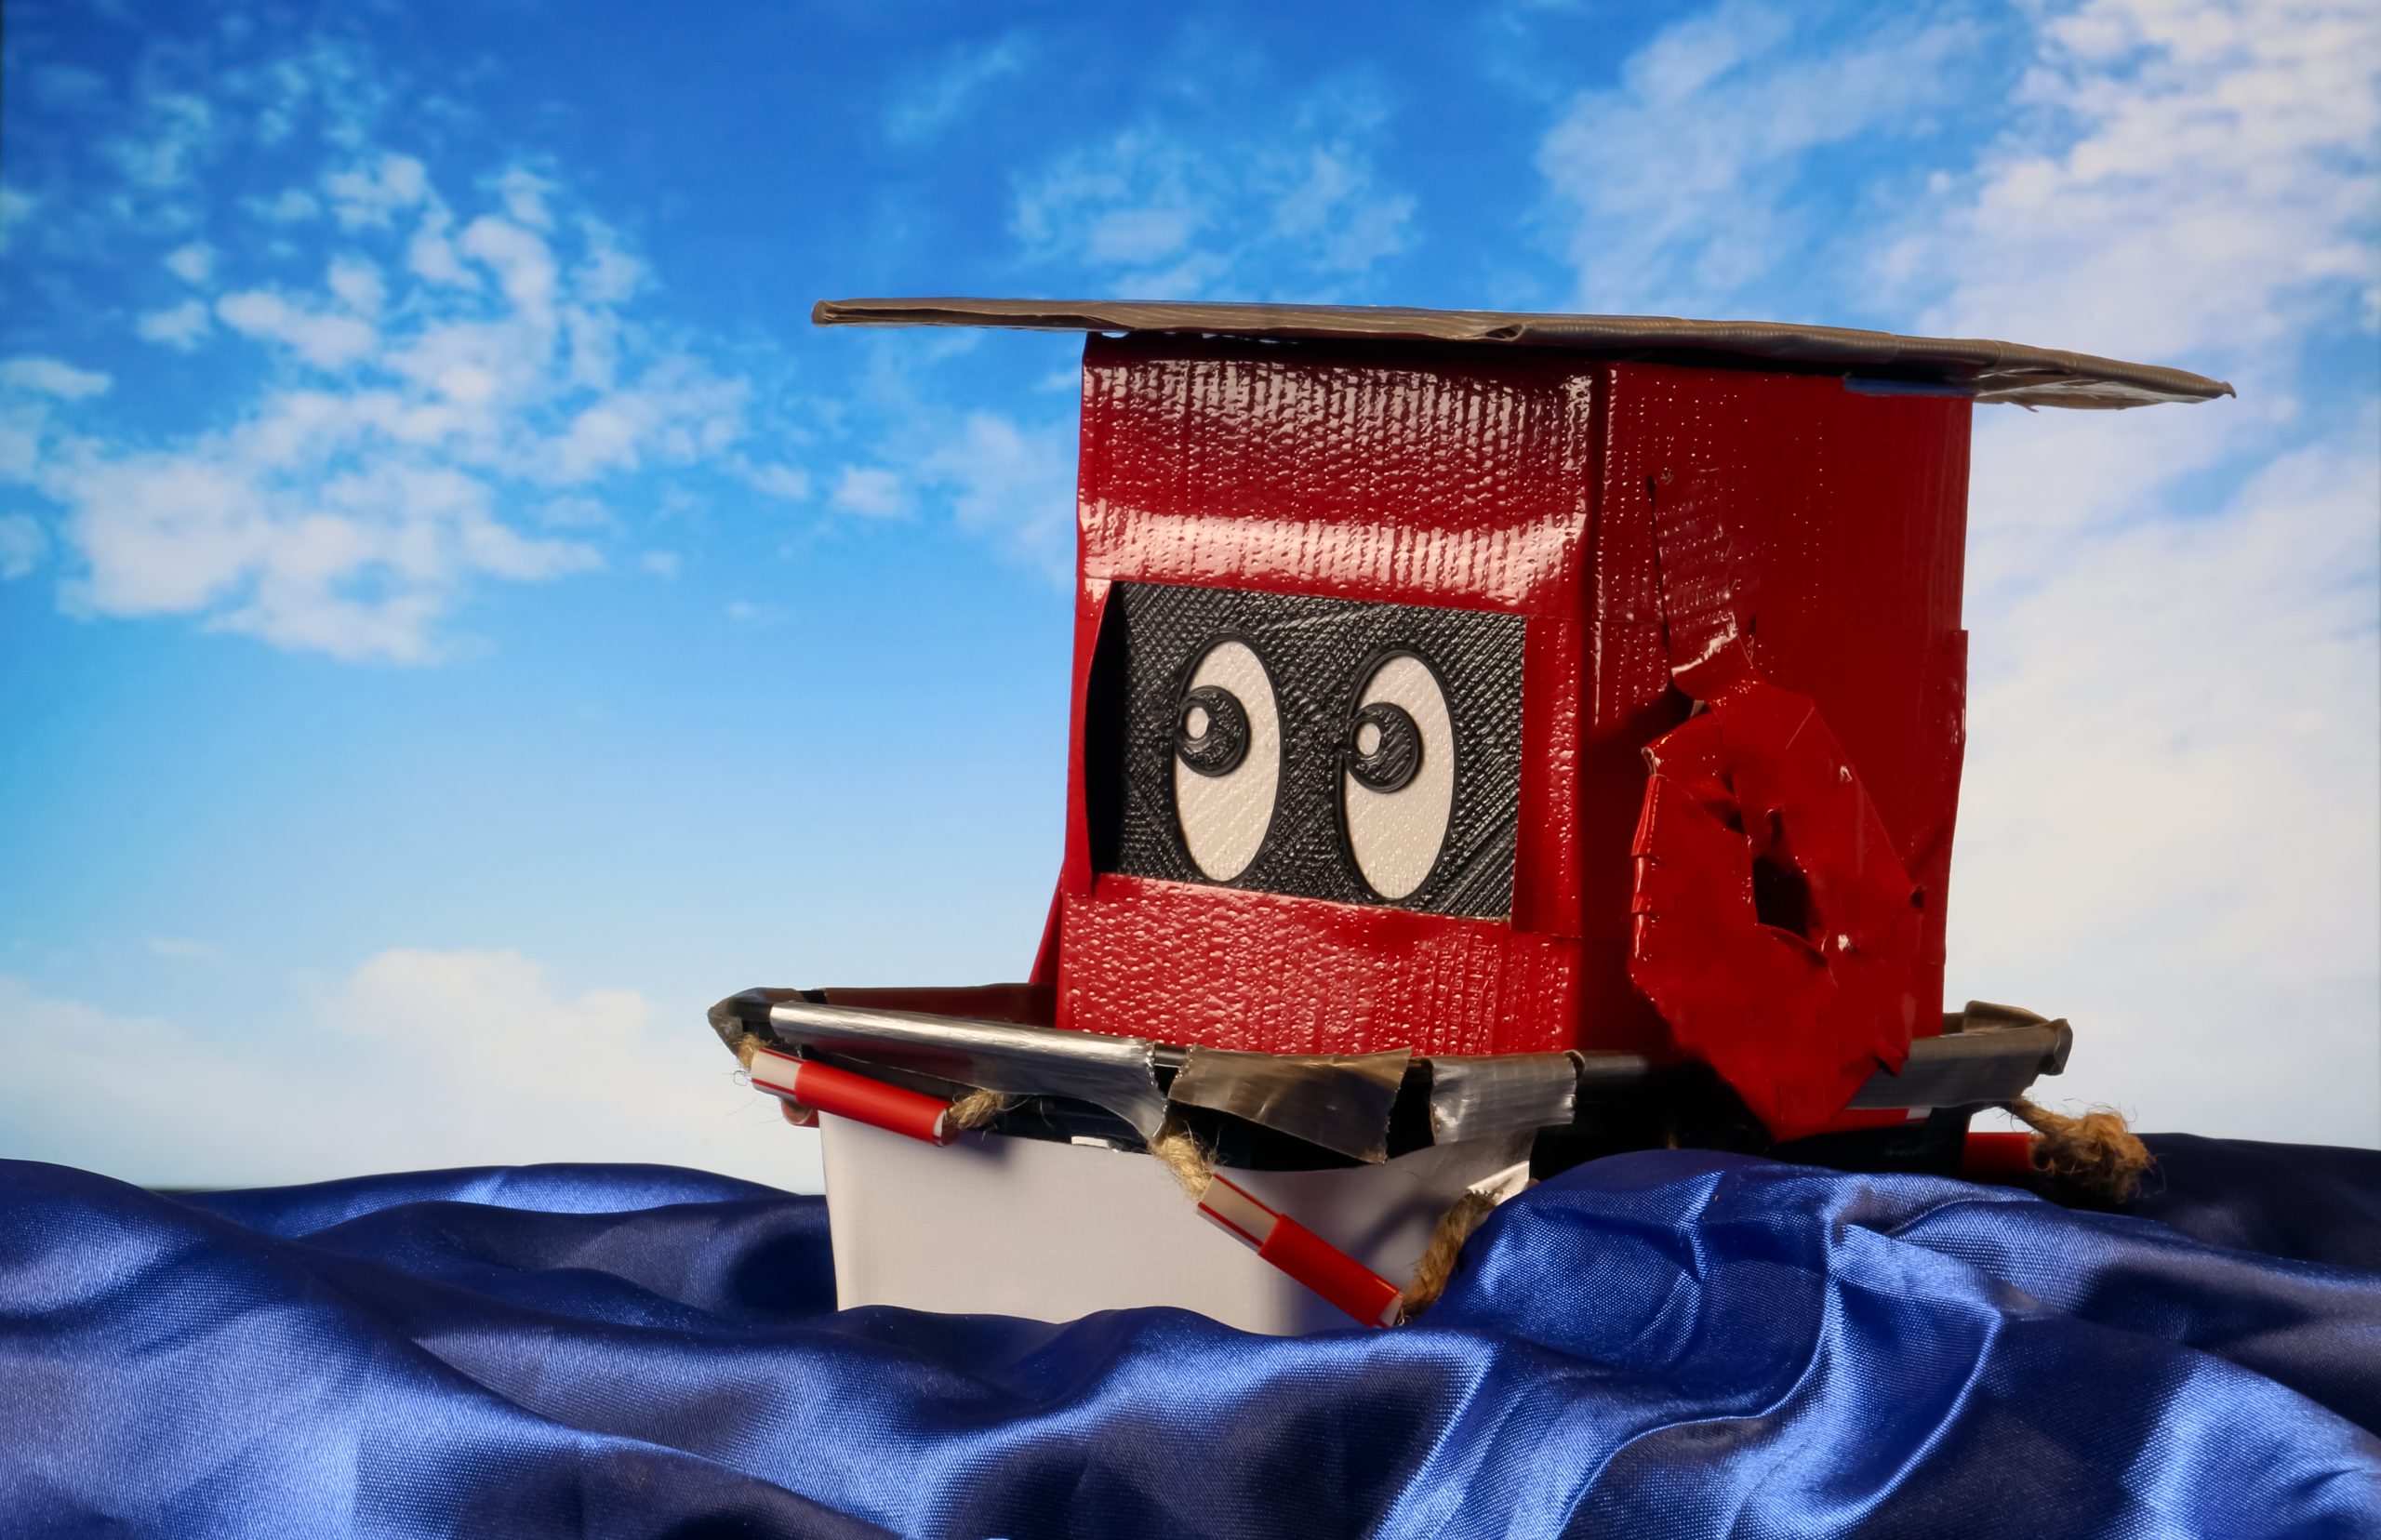 Recyclobot Toy Tim Brody (TB-12) The Tugboat sitting on blue wavy fabric and a blue and white cloud sky background